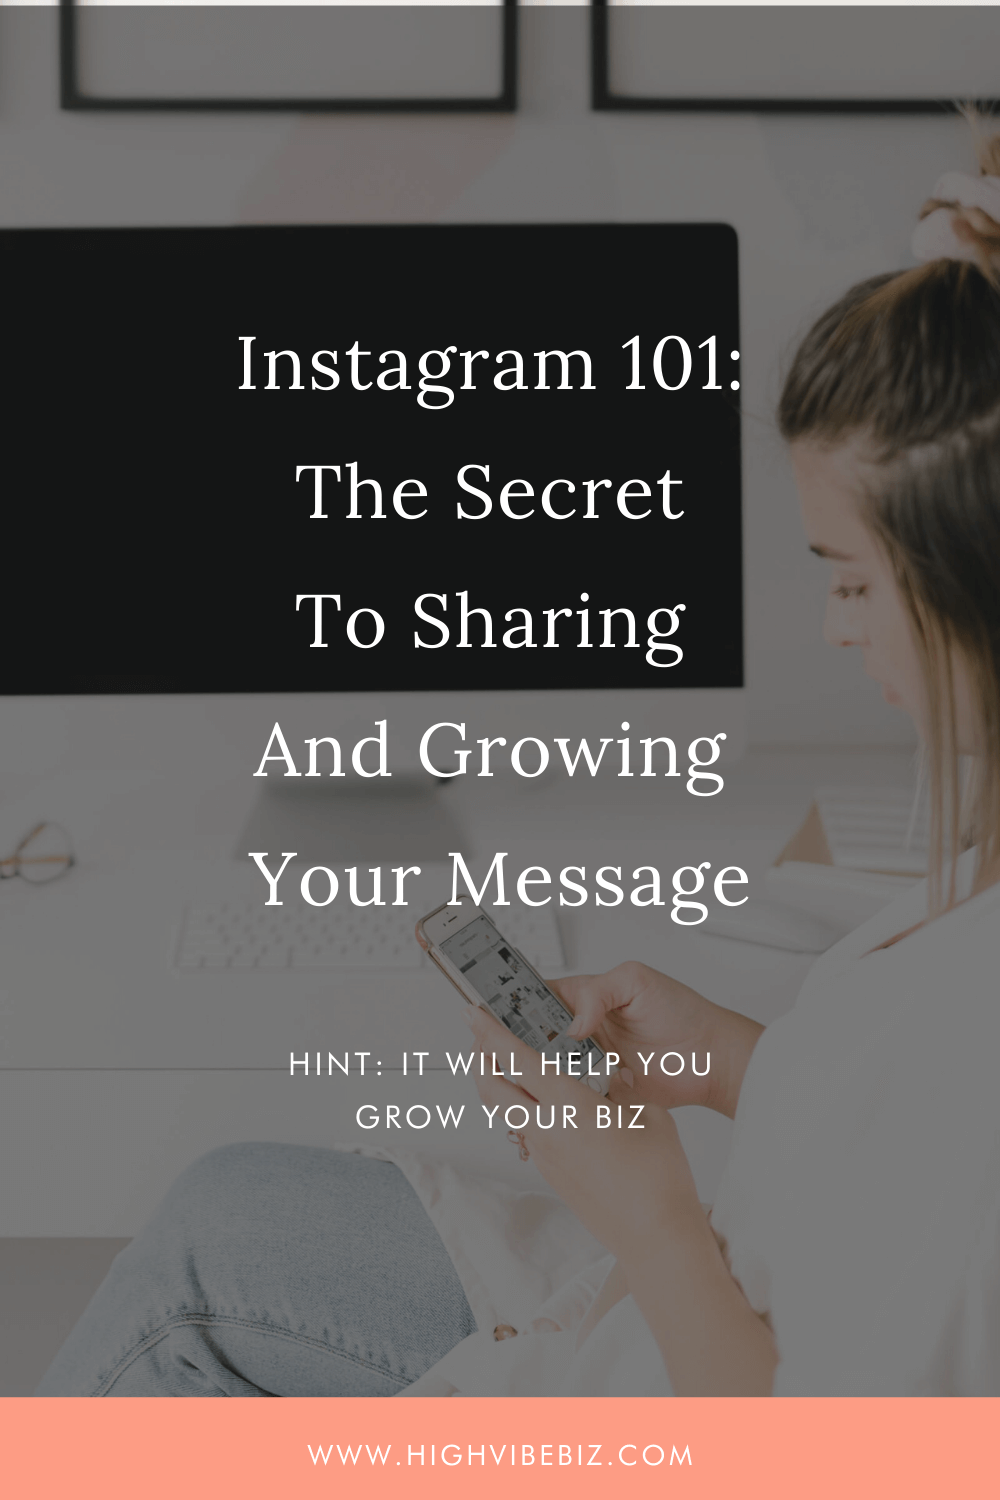 Instagram 101: The Secret To Sharing And Growing Your Message